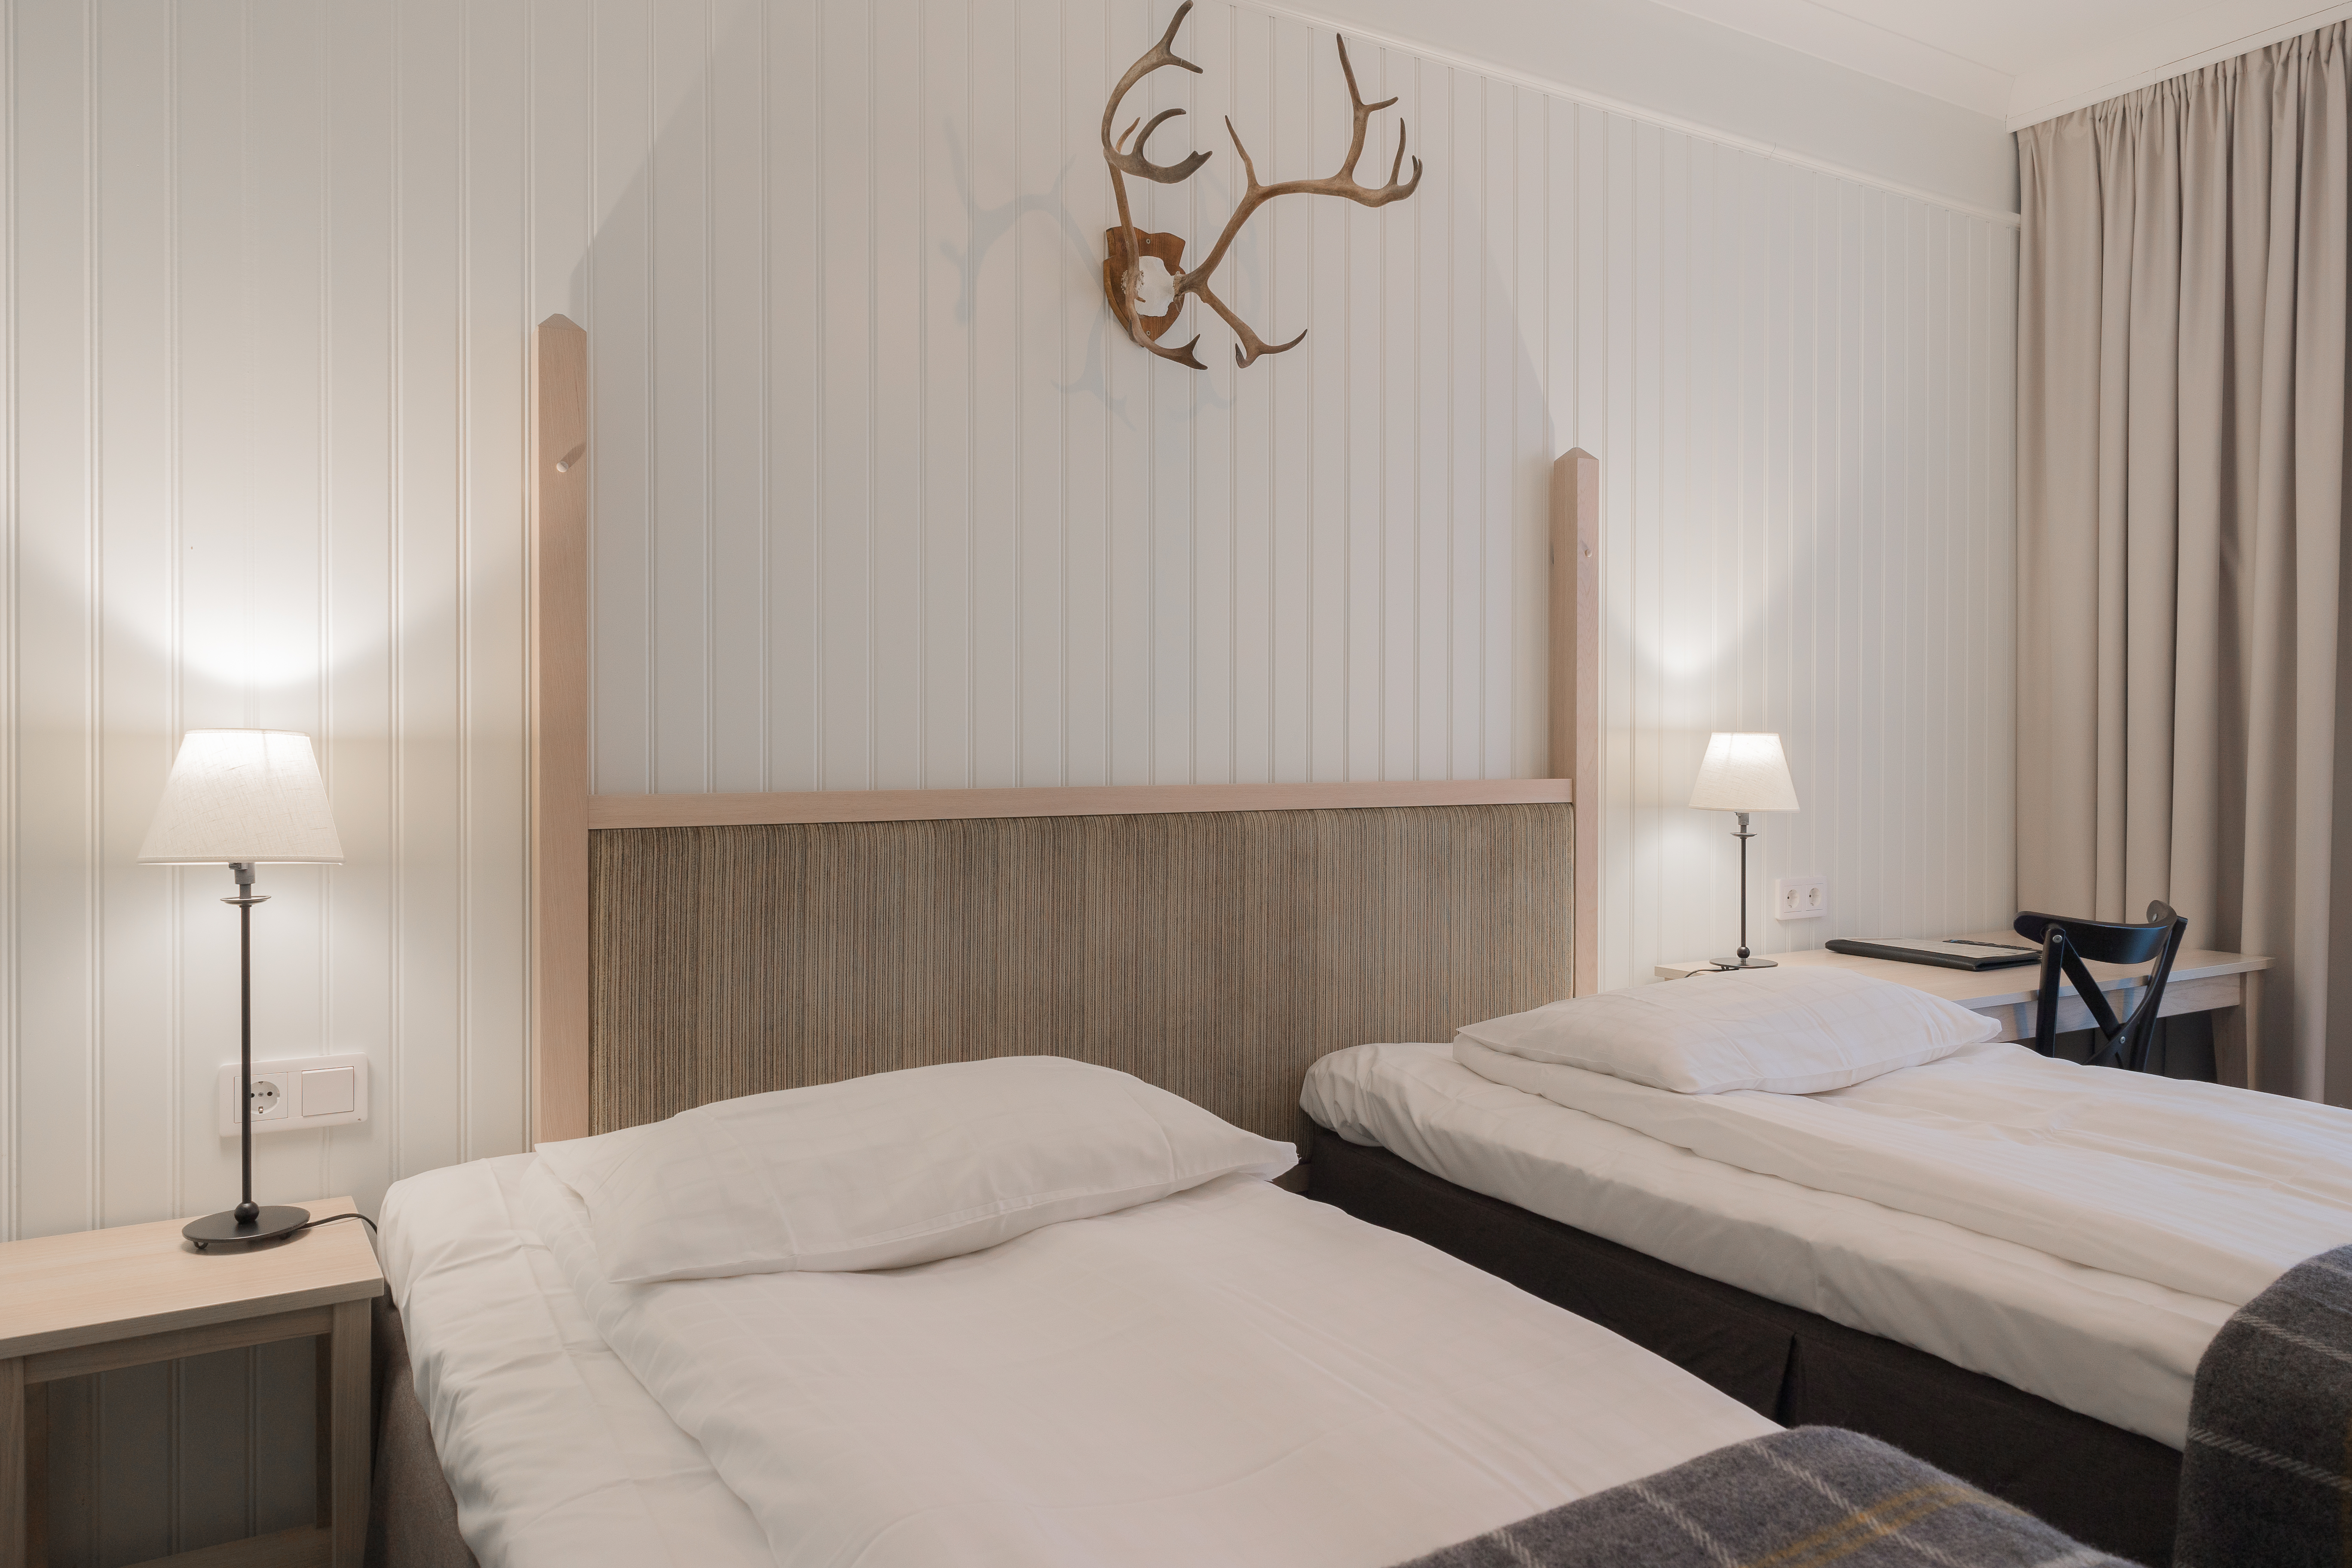 Cozy hotel room with separated beds, desk and animal horns on the wall